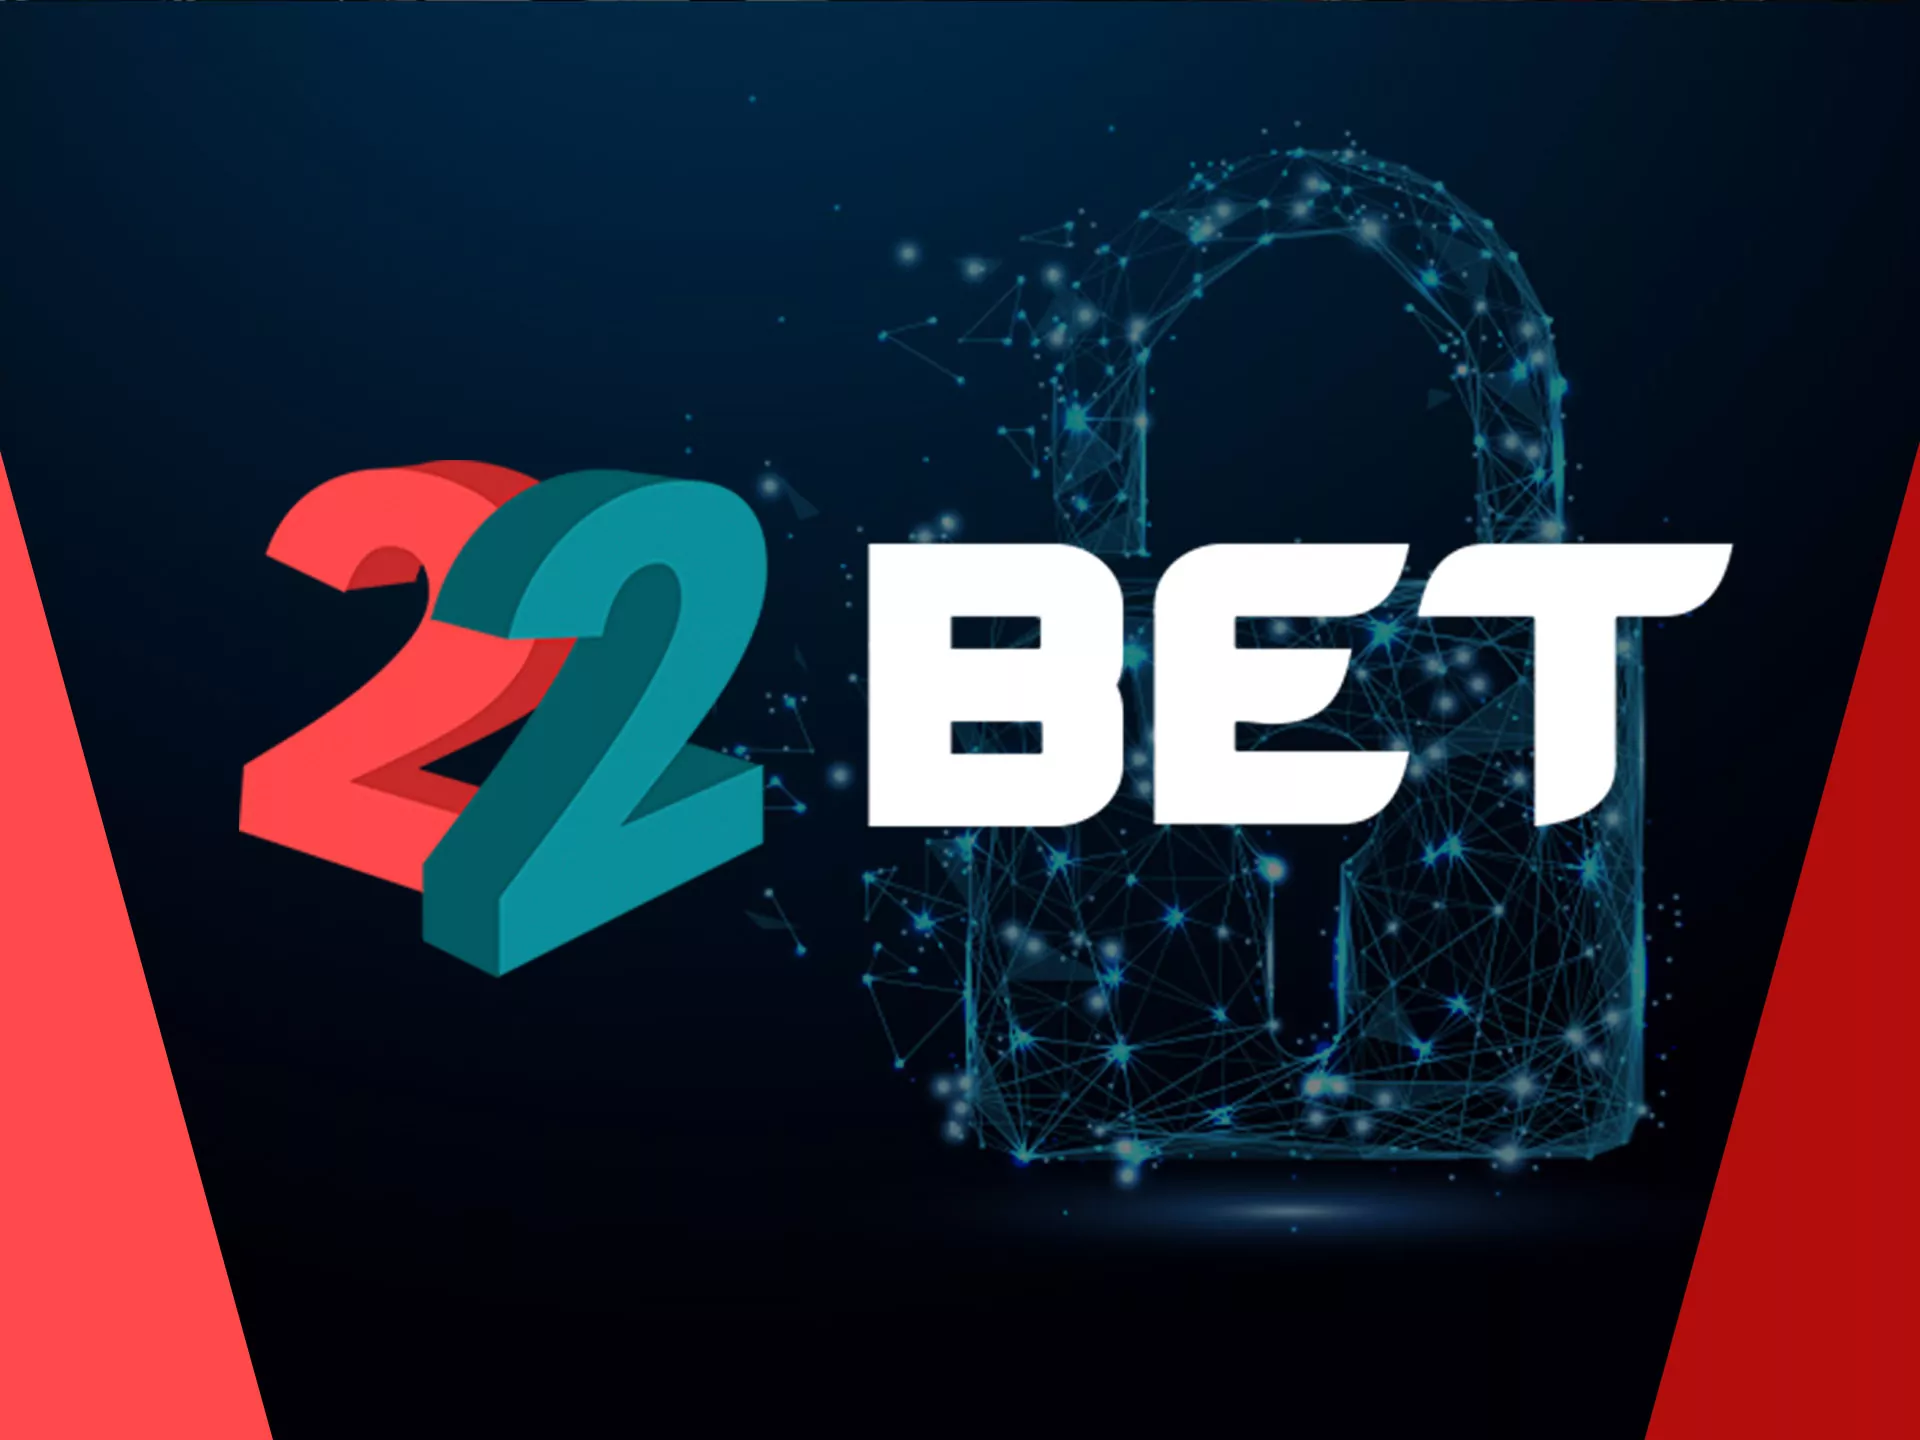 22bet app have high quality secure of your private infromation.